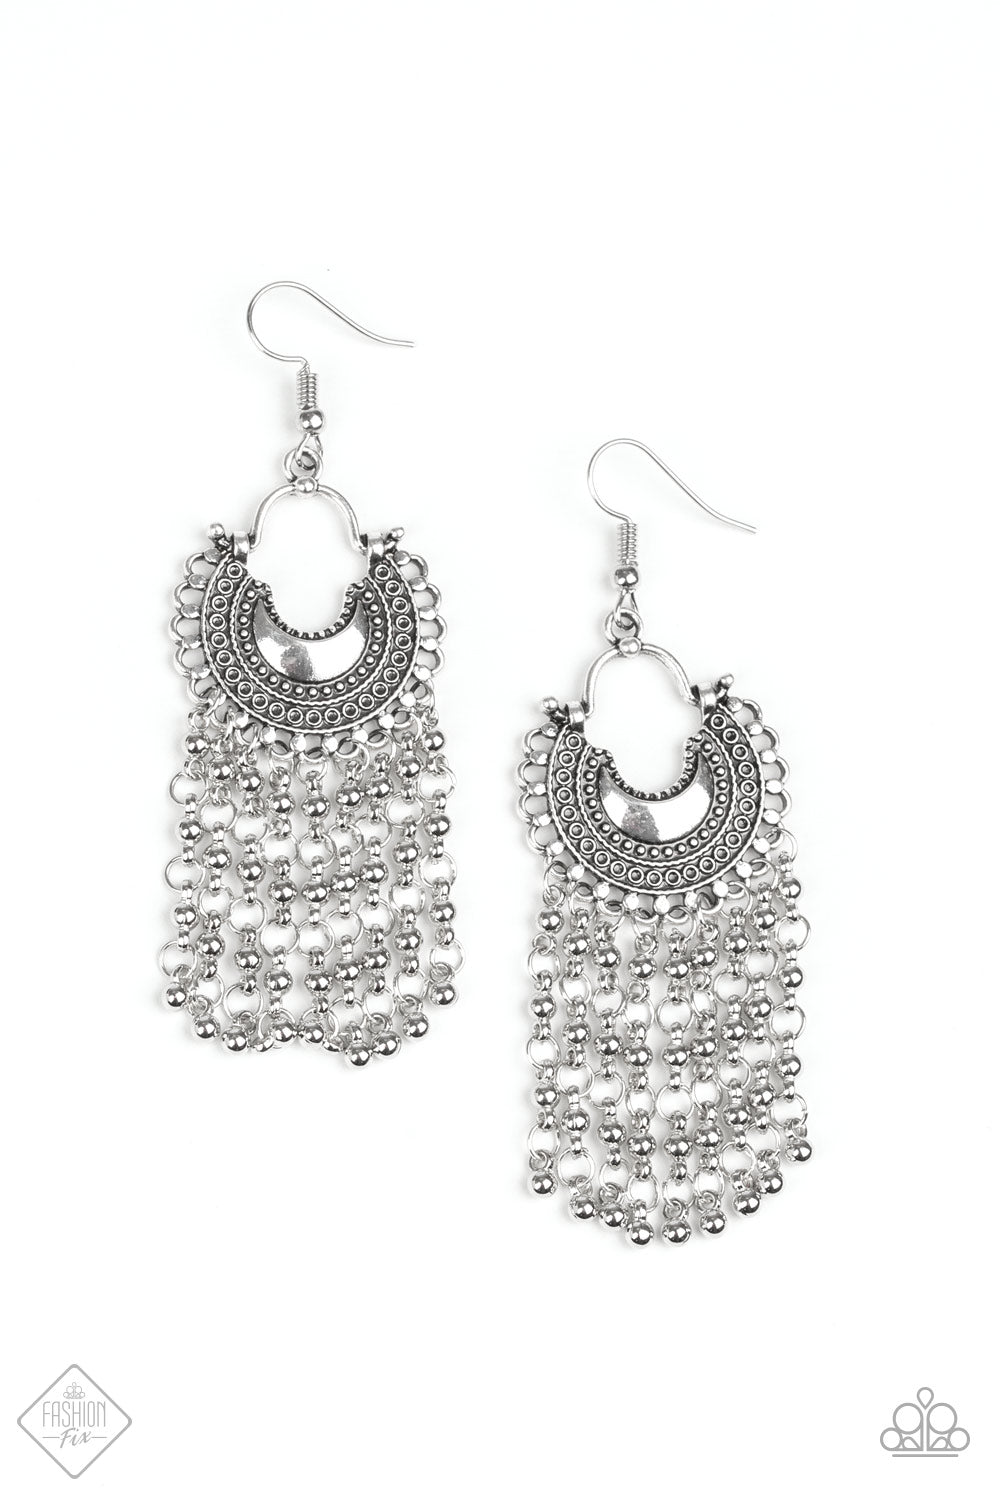 Catching Dreams Silver Earring - Paparazzi Accessories Item #E148 Beaded silver chains stream from the bottom of a textured half-moon silver frame, creating a dreamy fringe. Earring attaches to a standard fishhook fitting. All Paparazzi Accessories are lead free and nickel free!  Sold as one pair of earrings.